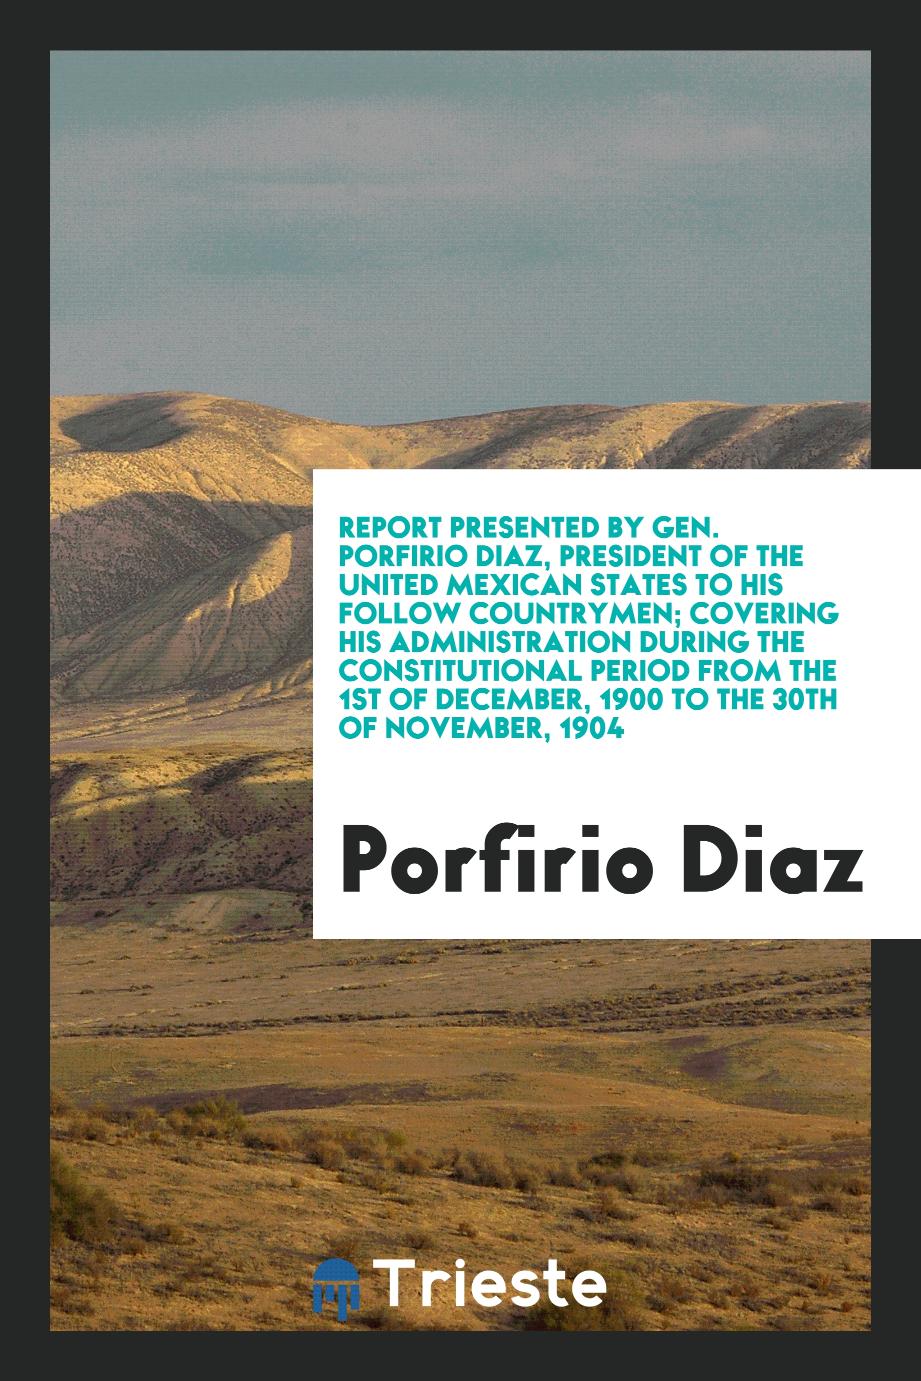 Report Presented by Gen. Porfirio Diaz, President of the United Mexican States to His Follow Countrymen; Covering His Administration During the Constitutional Period from the 1st of December, 1900 to the 30th of November, 1904